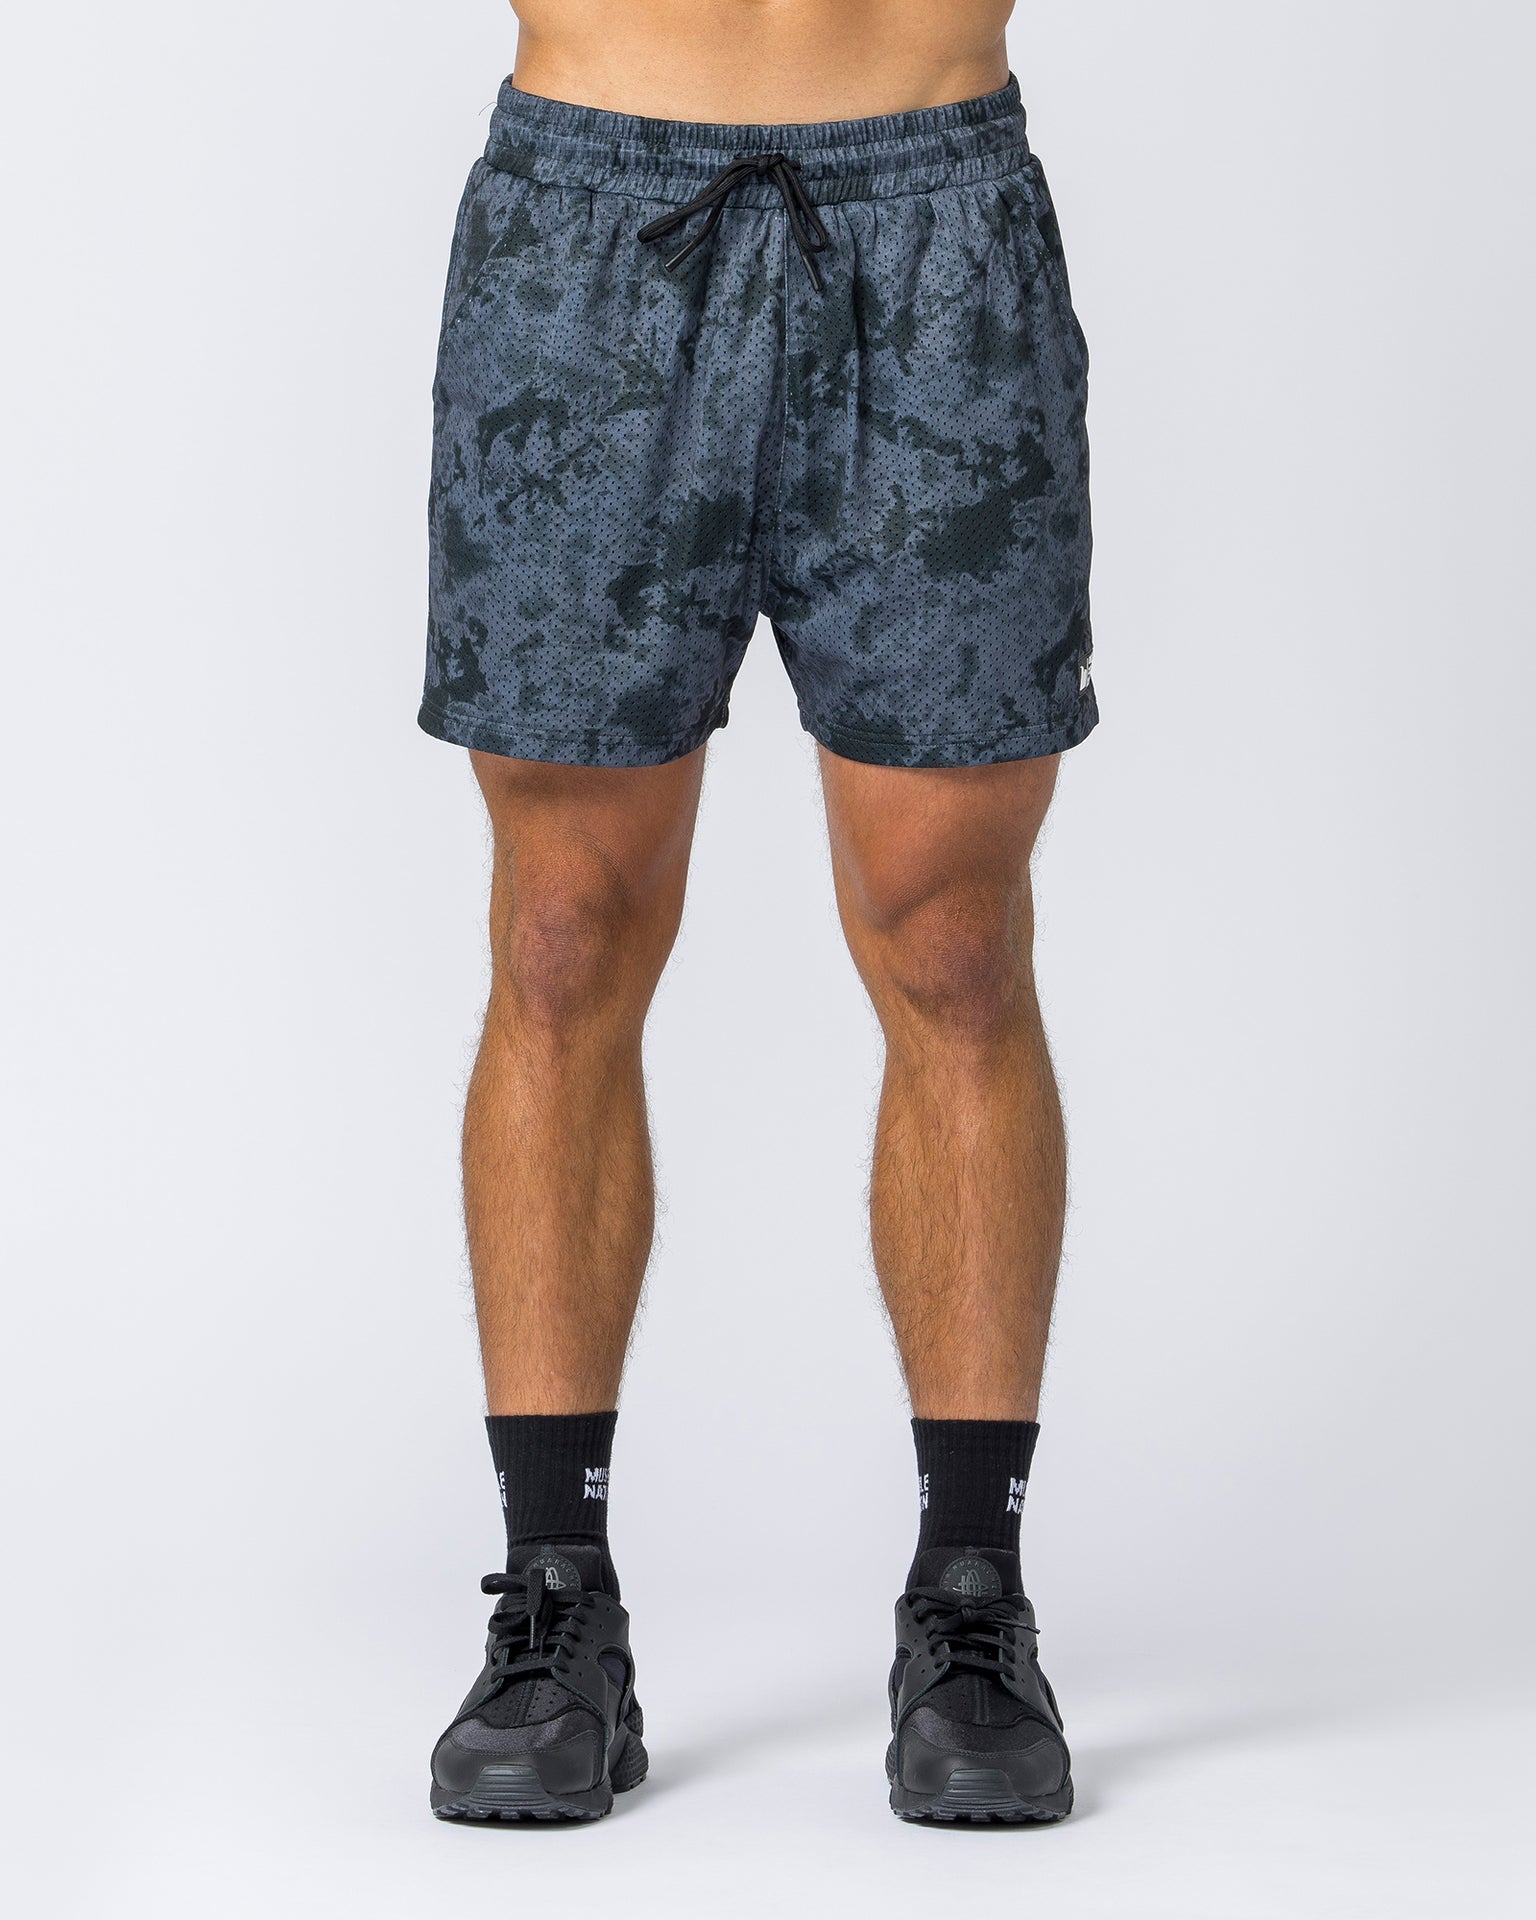 Muscle Nation Gym Shorts Copy of Retro Shorts - Dark Harbour